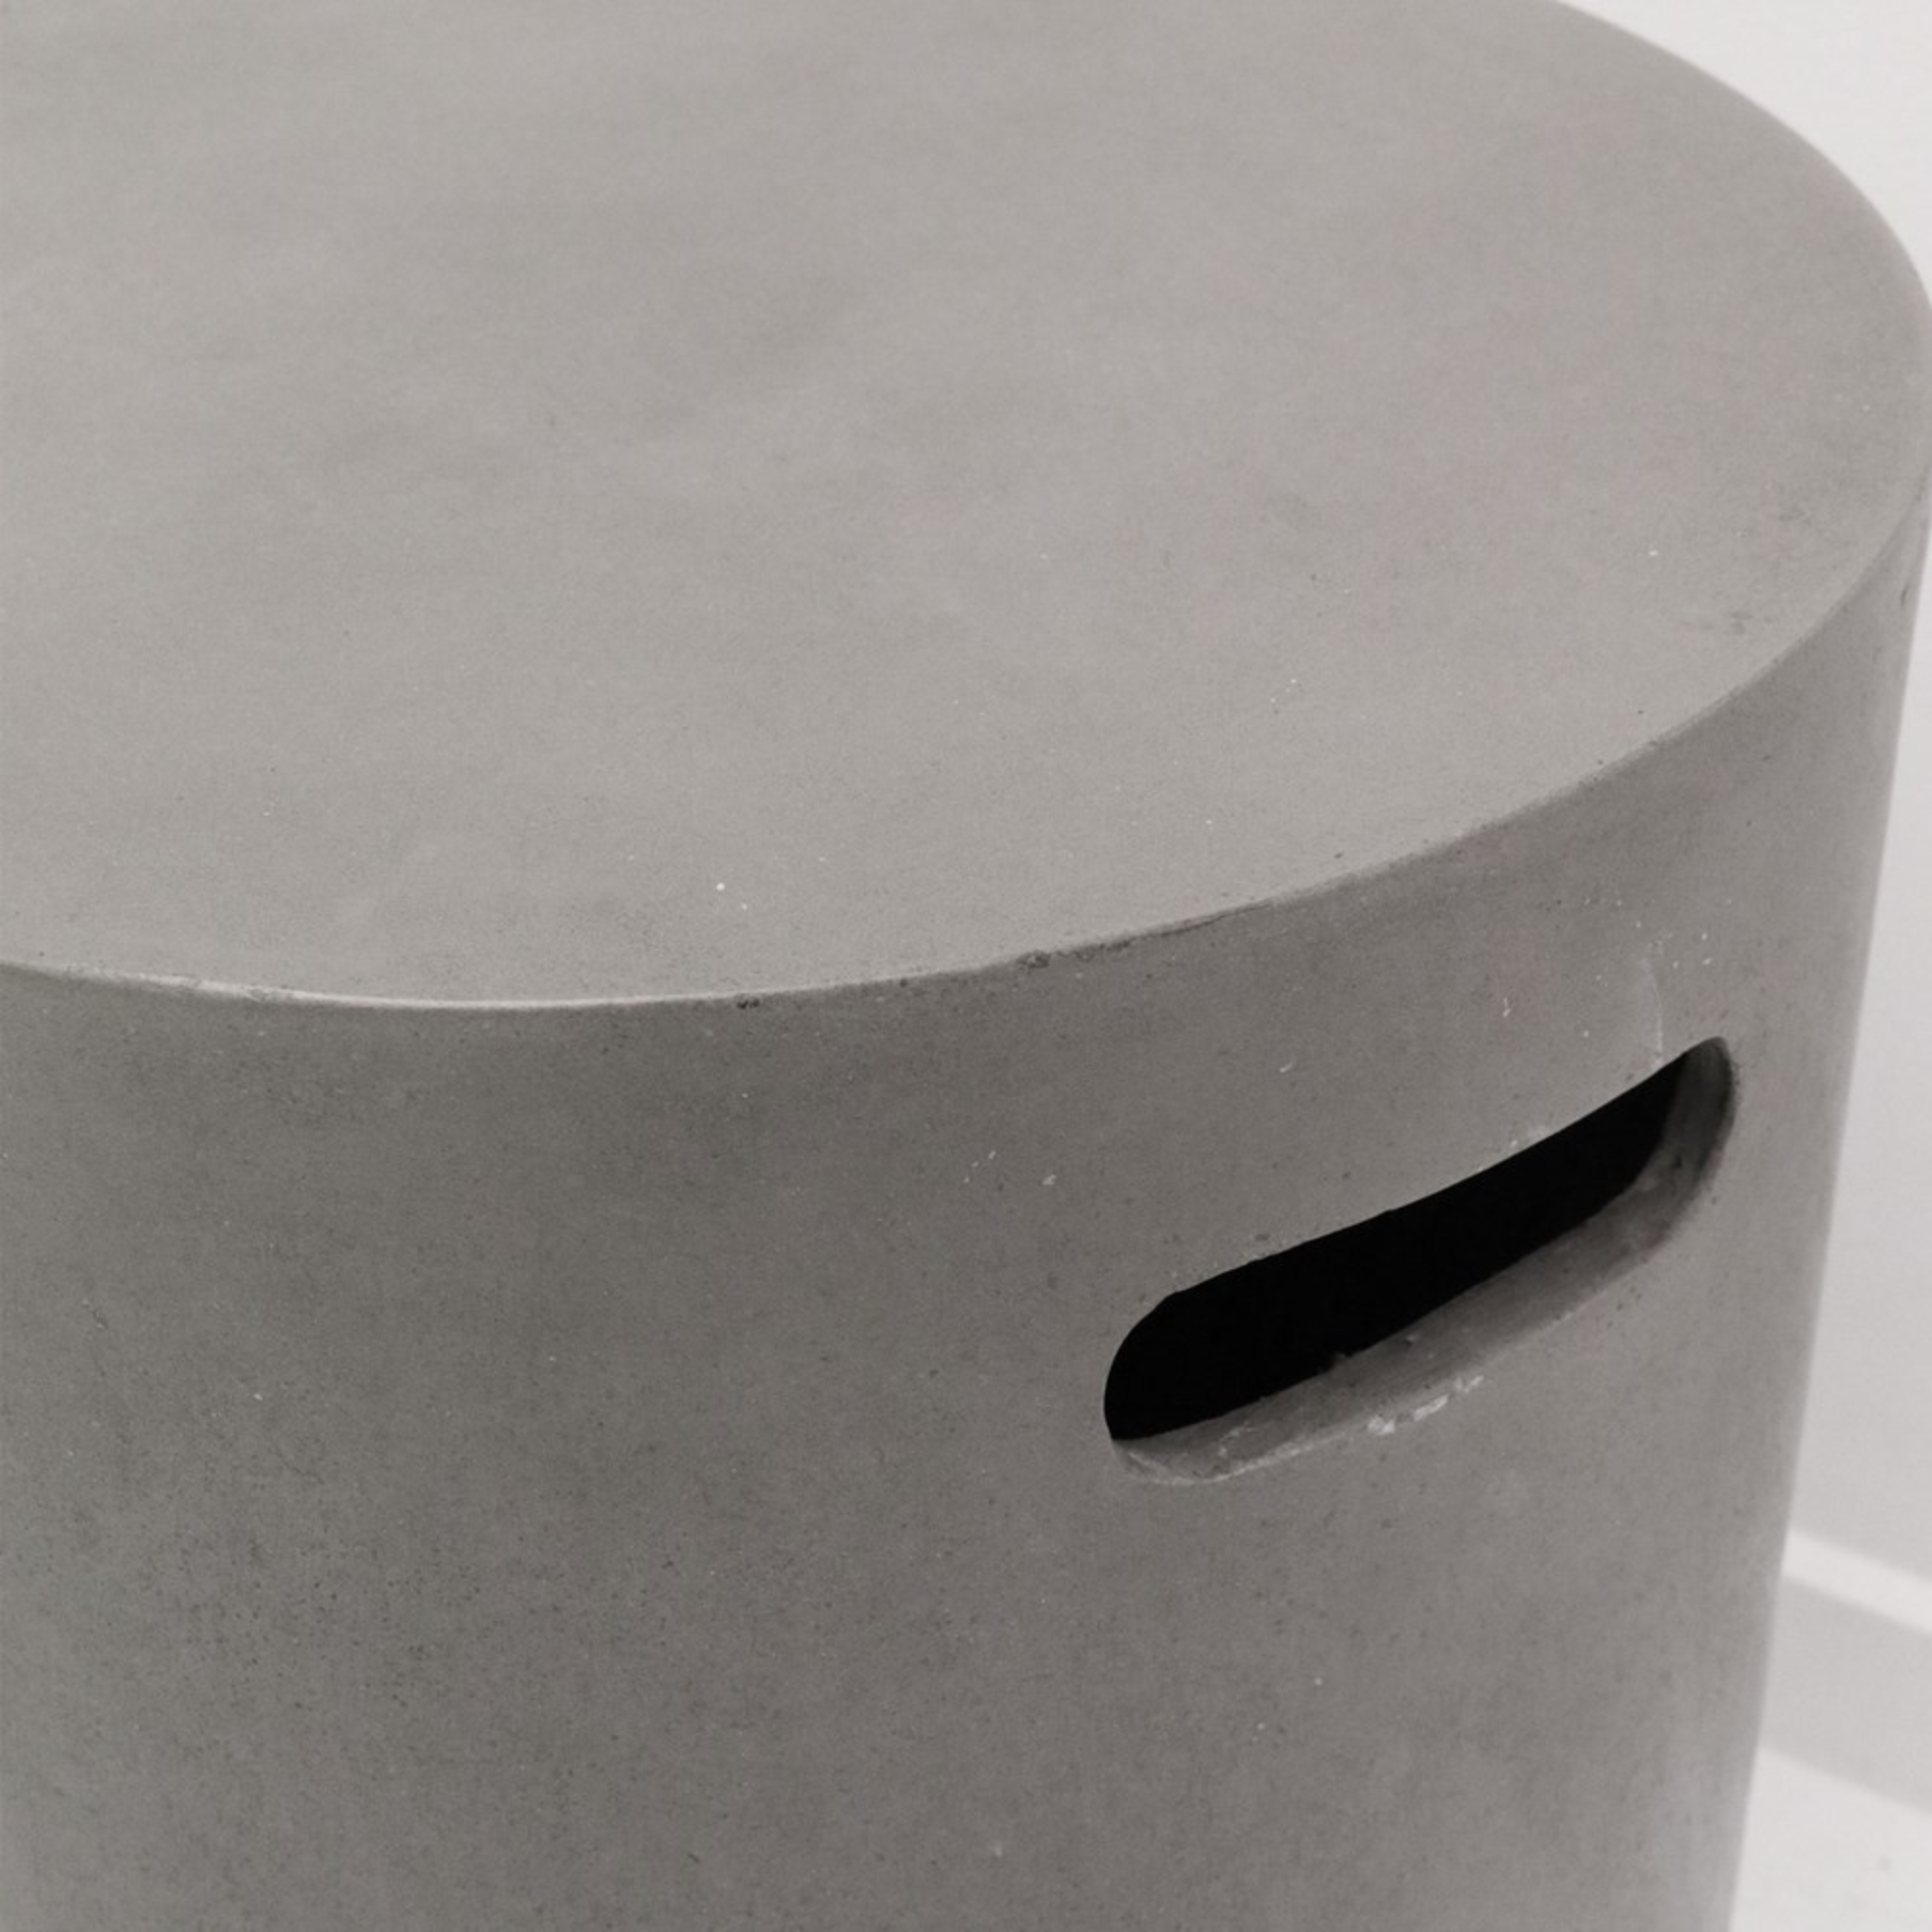 CONCRETE PIPE SIDE TABLE or STOOL